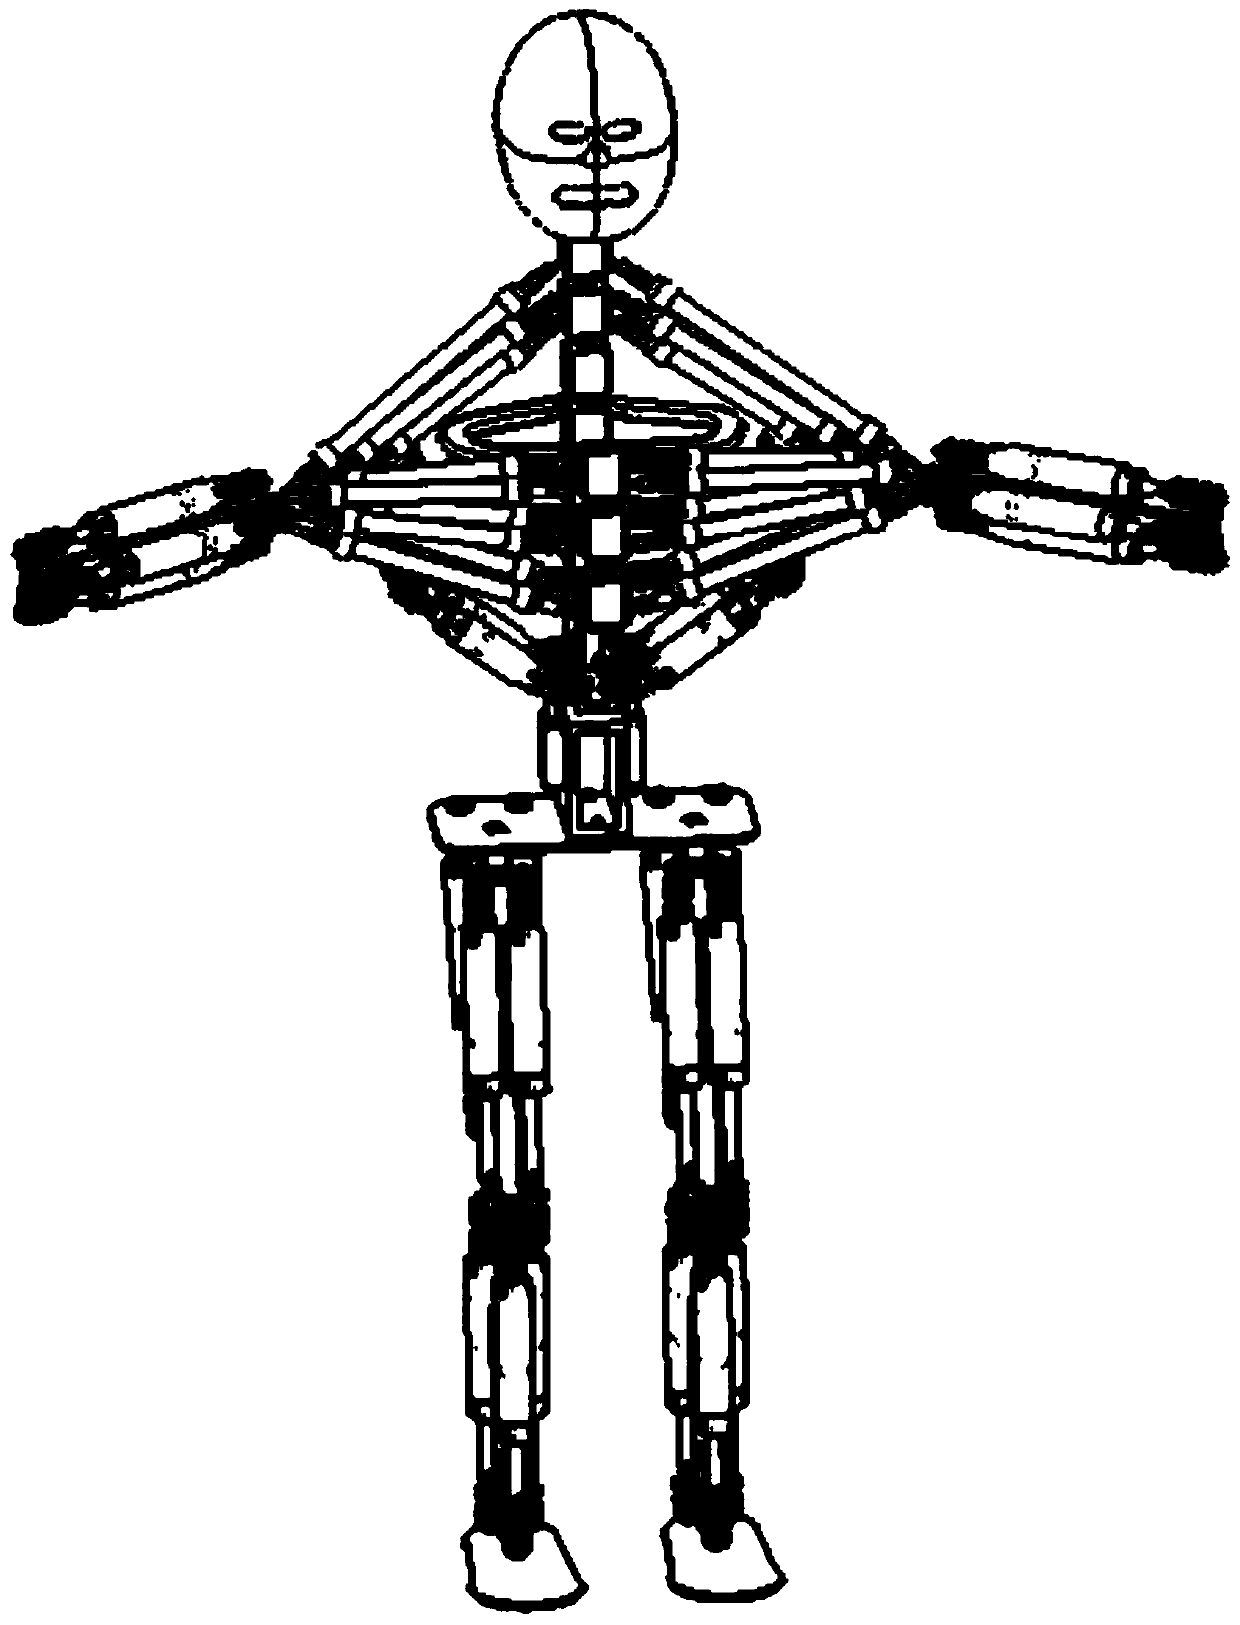 A Humanoid Robot System Based on Pneumatic Muscle and Cylinder